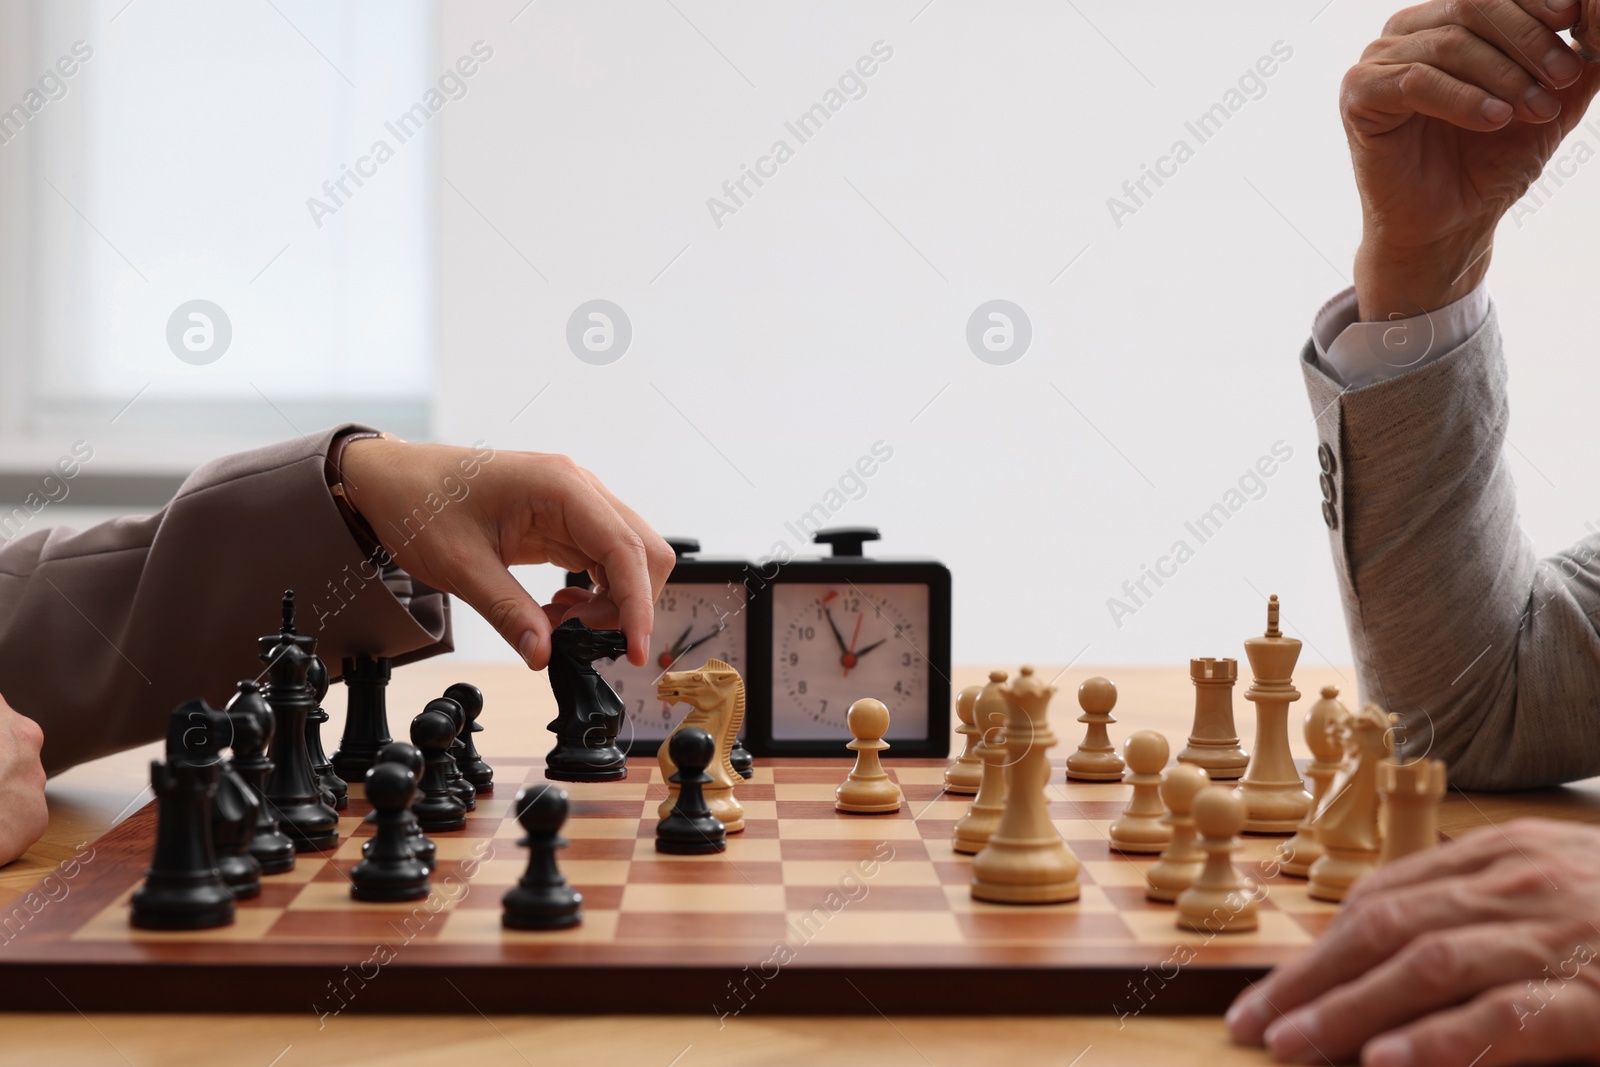 Photo of Men playing chess during tournament at table indoors, closeup